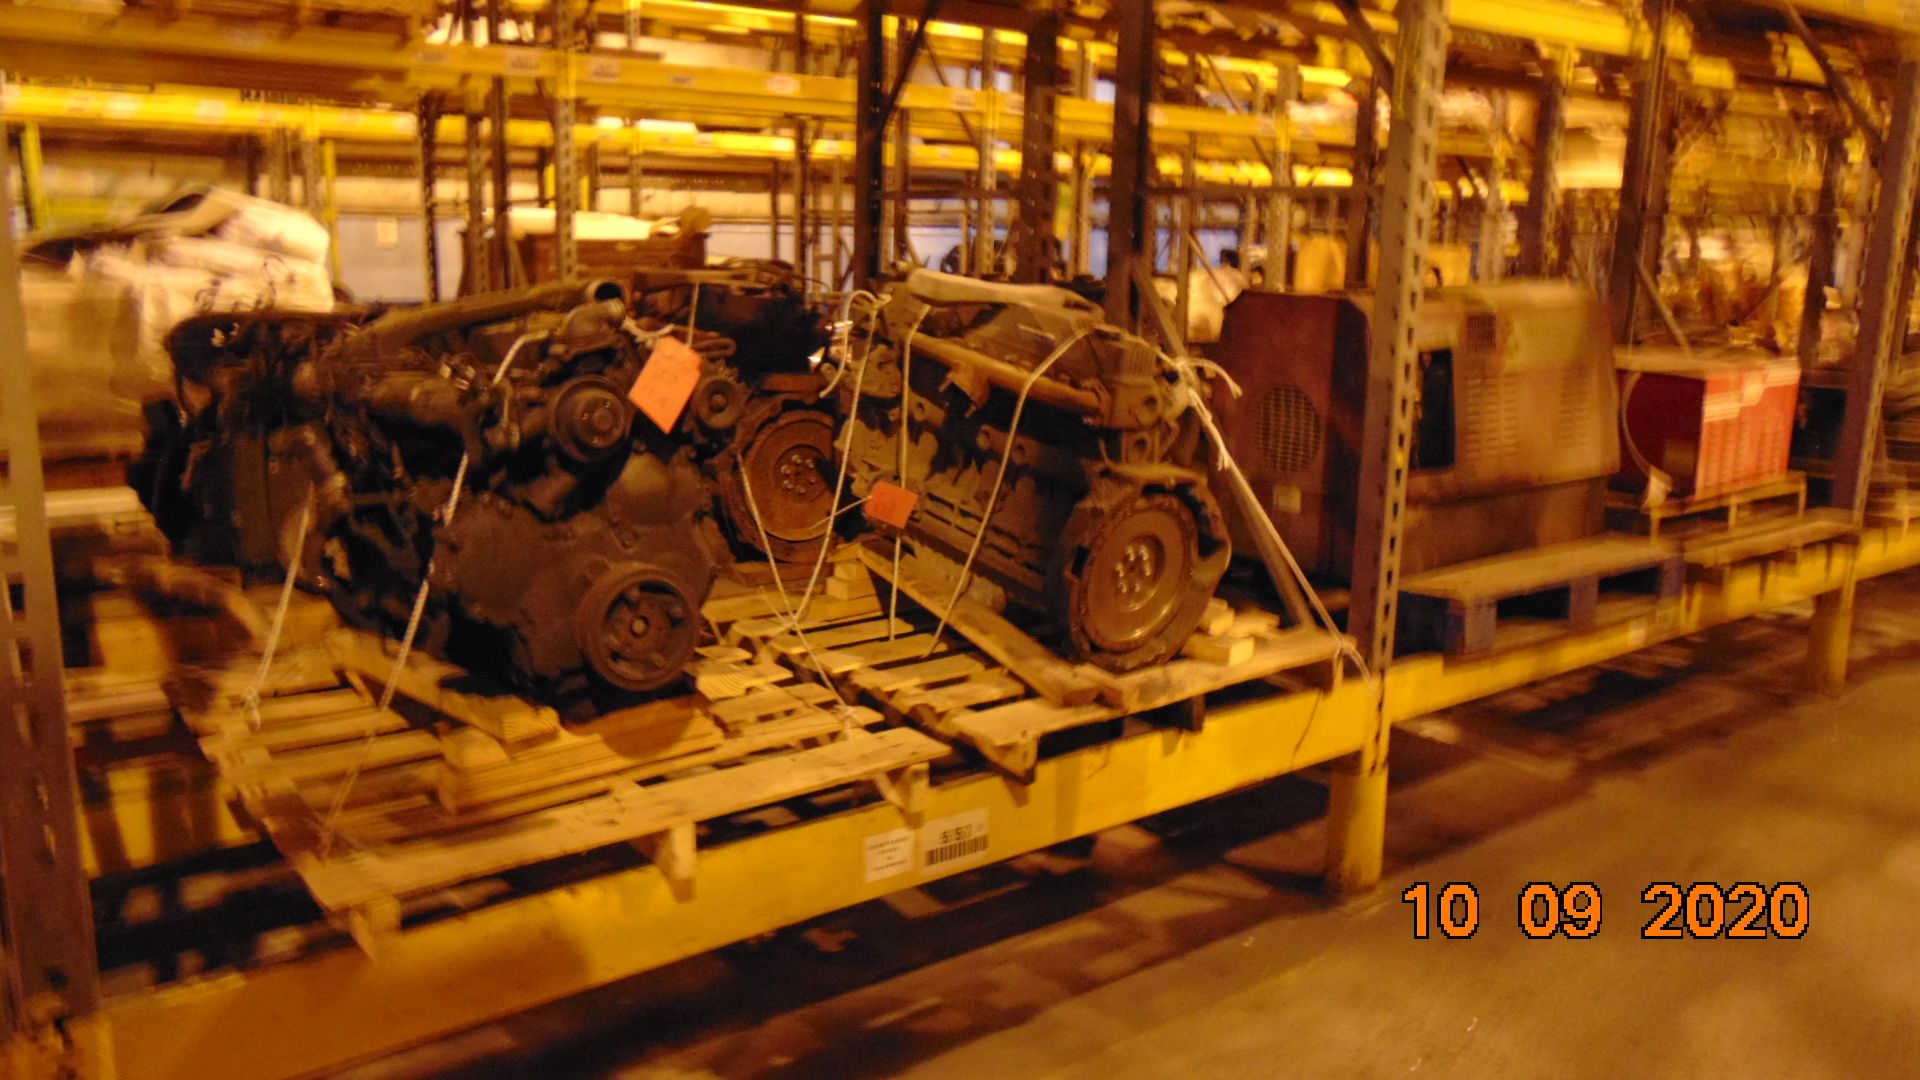 Contents of Warehouse / Industrial Building - Image 5 of 26